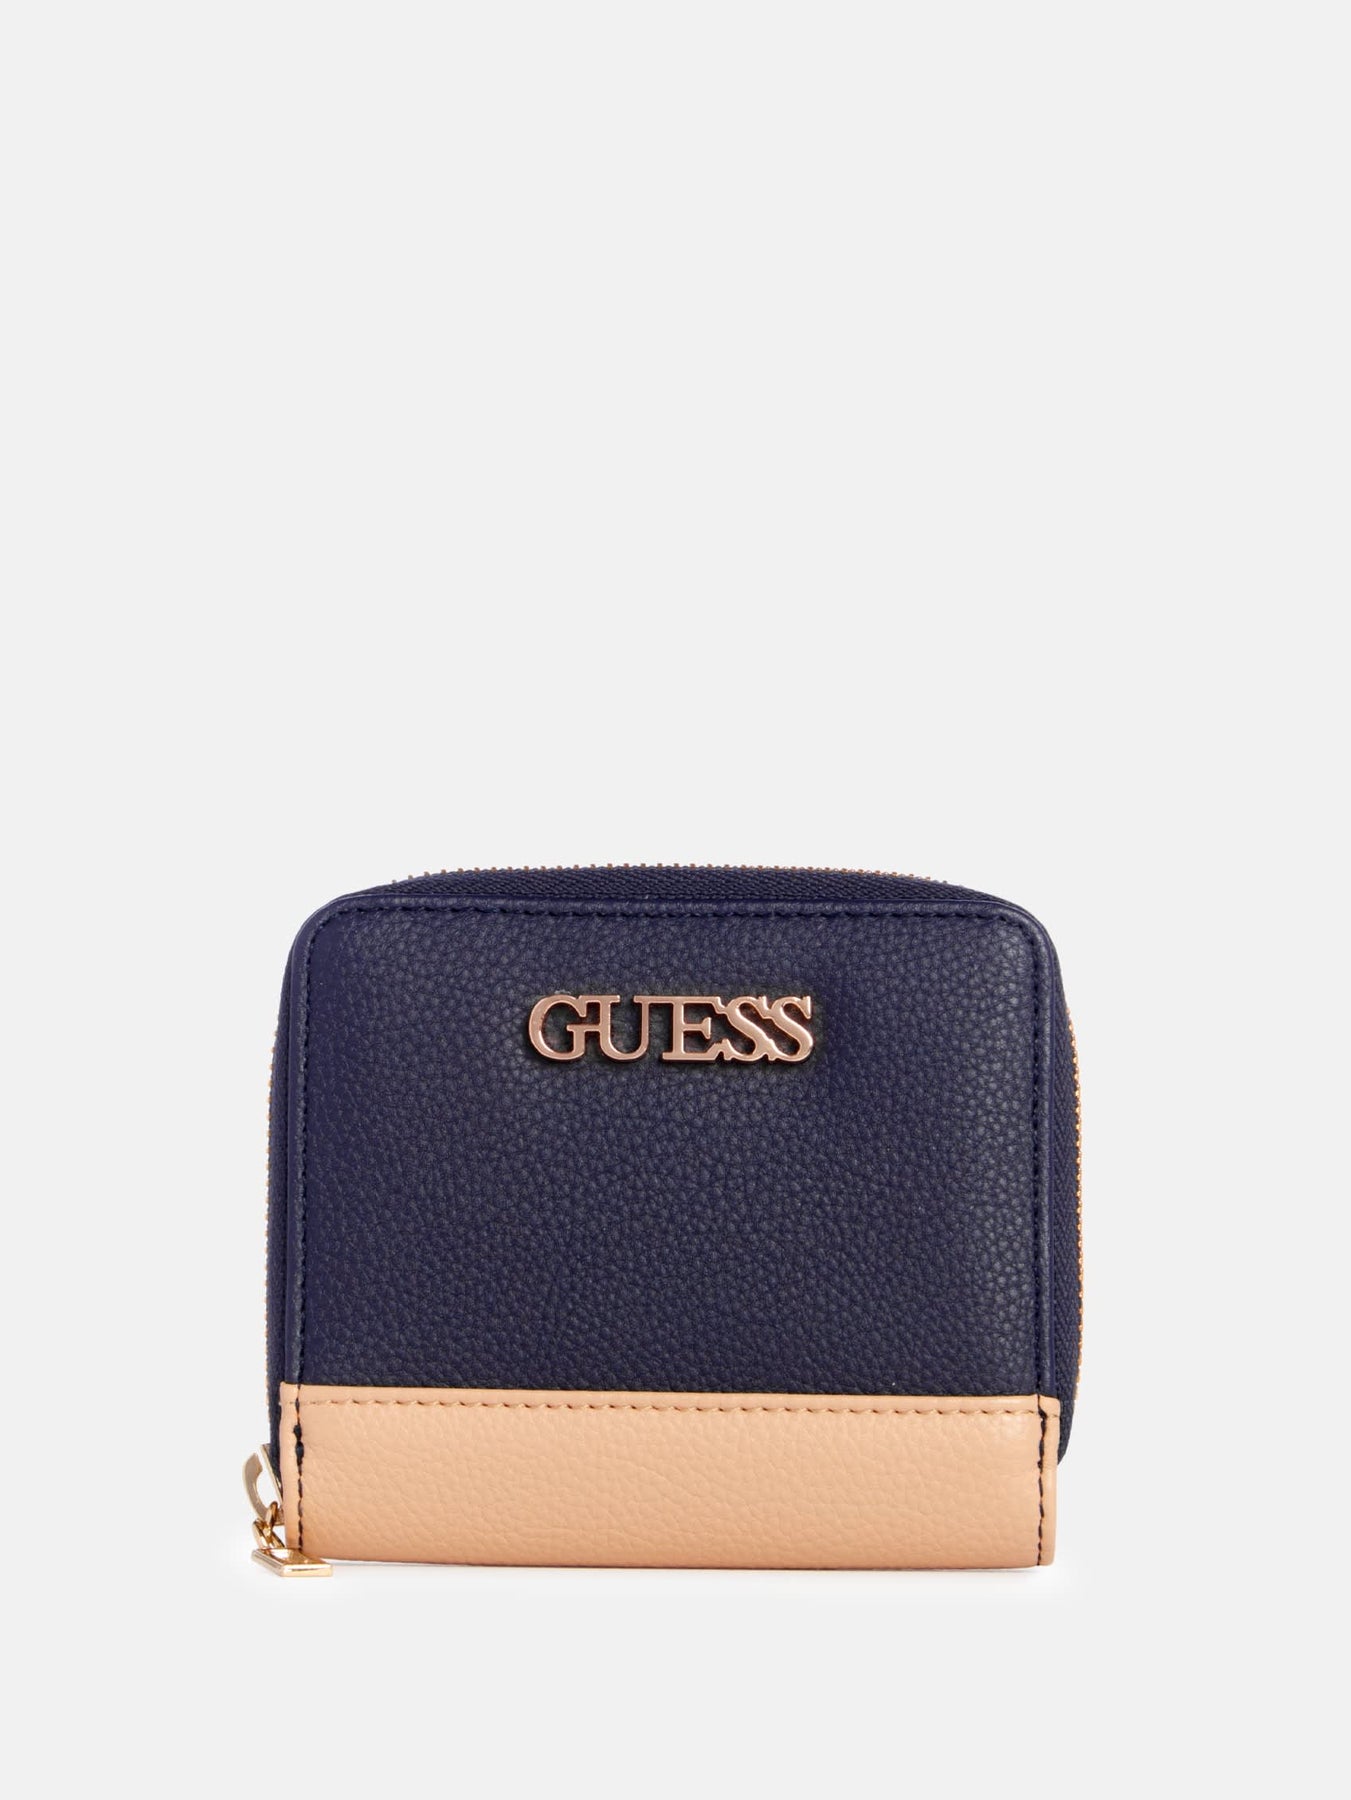 Buy Guess perfume, watches and accessories online now! | Catch.co.nz